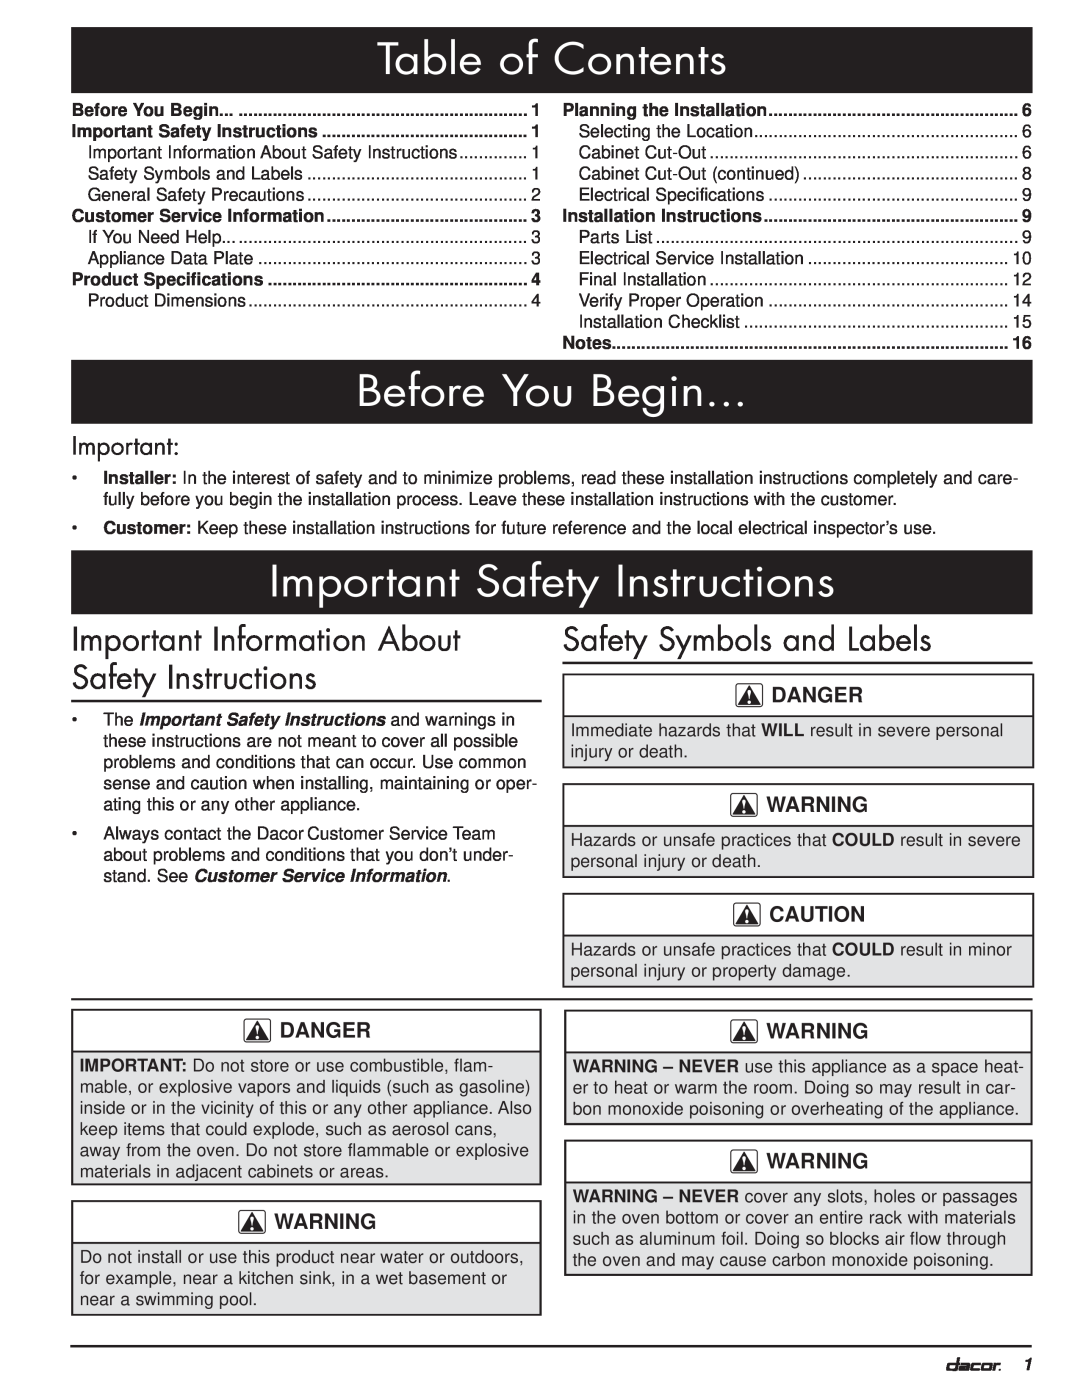 Dacor MO manual Table of Contents, Before You Begin, Important Safety Instructions, Safety Symbols and Labels, Danger 